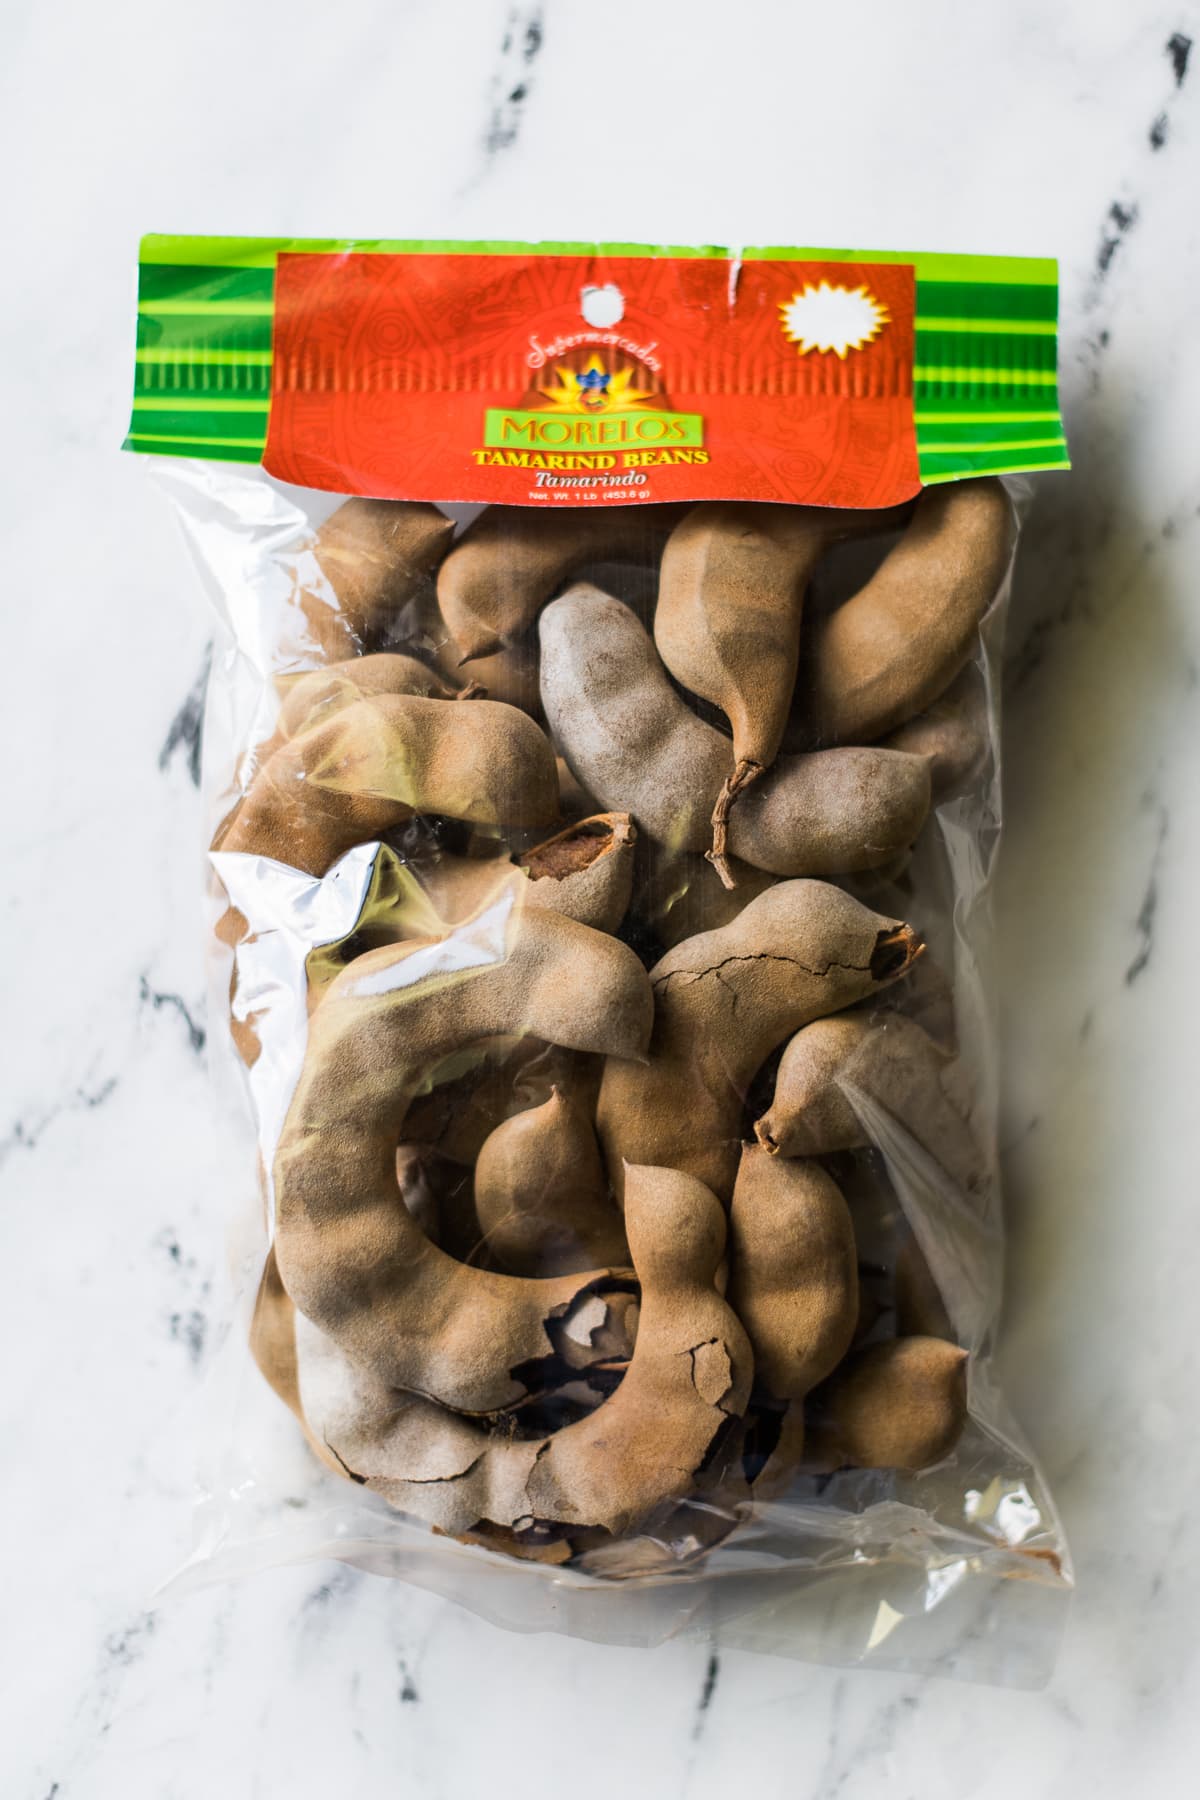 Tamarindo pods in a bag